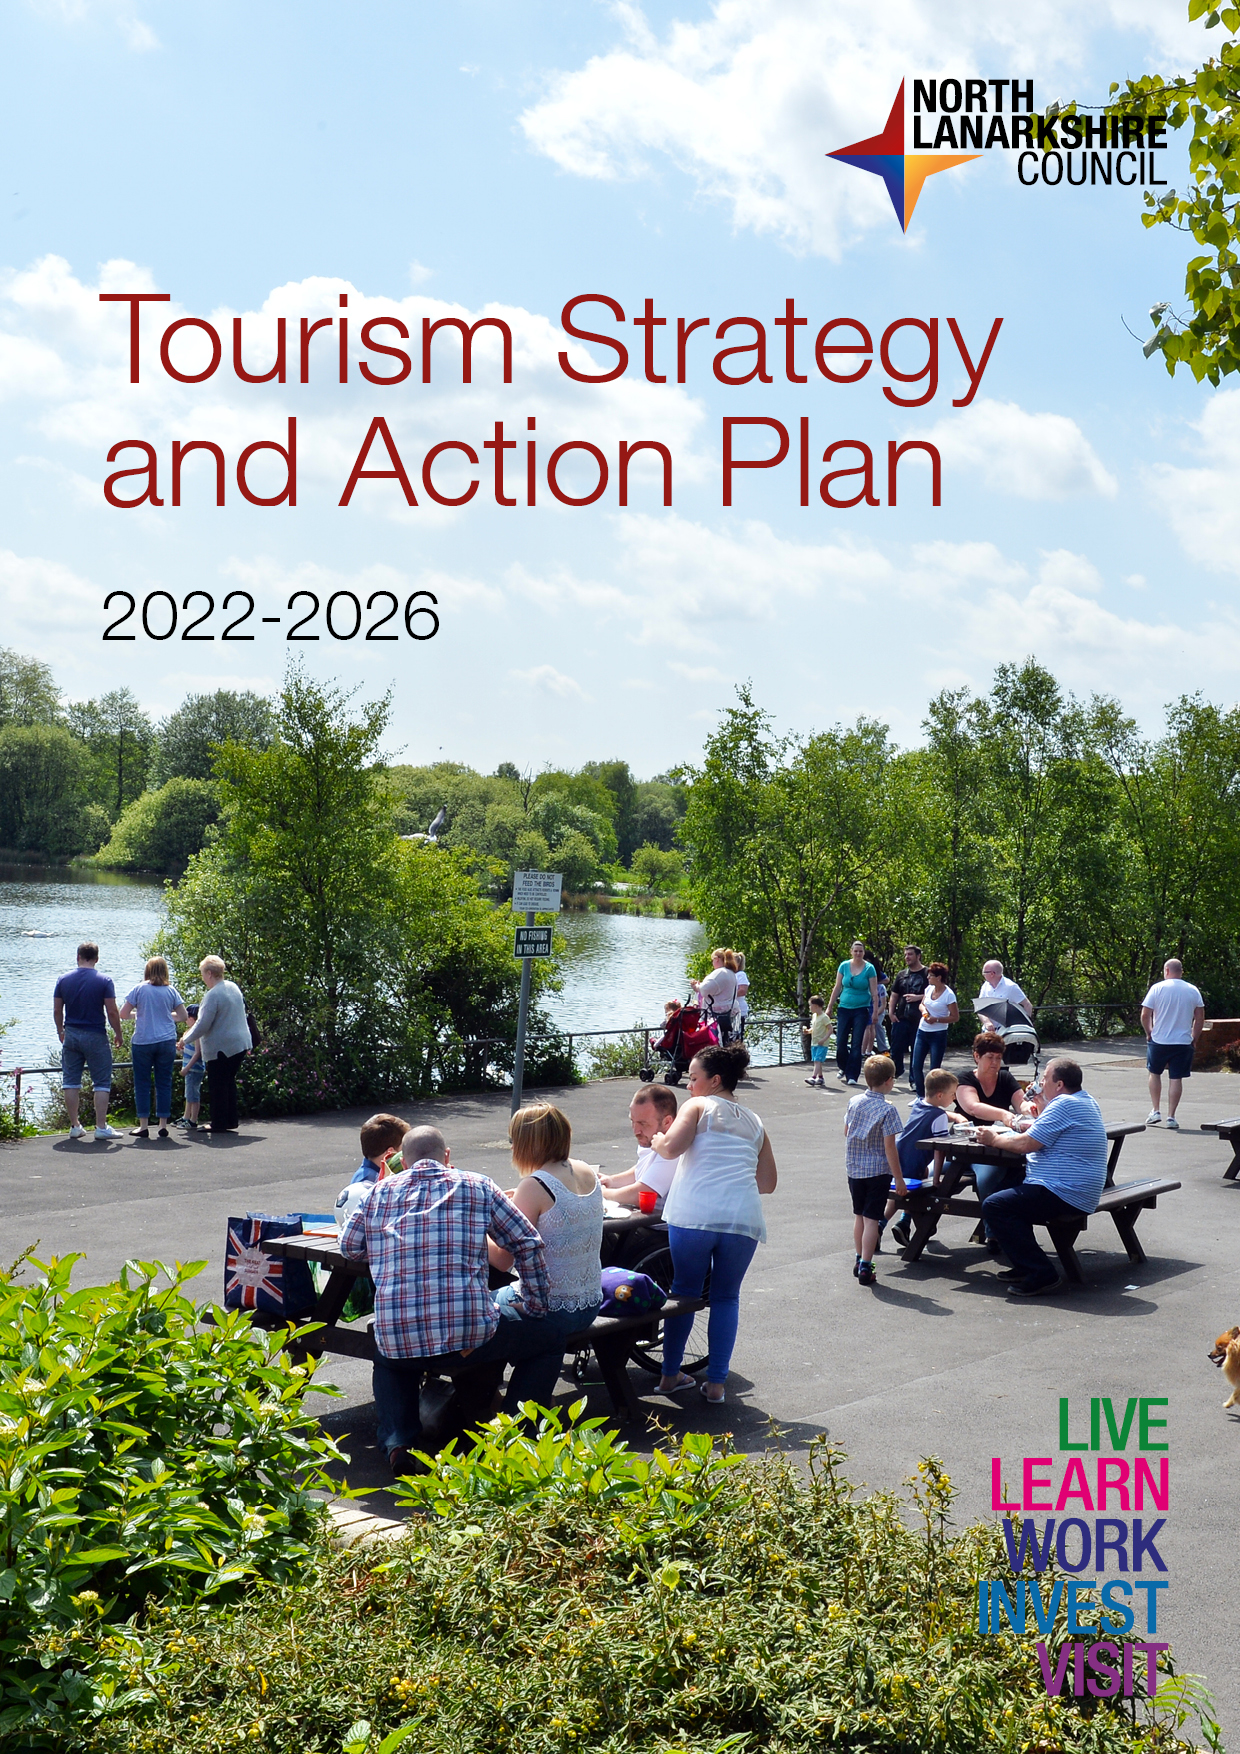 tourism industry recovery plan